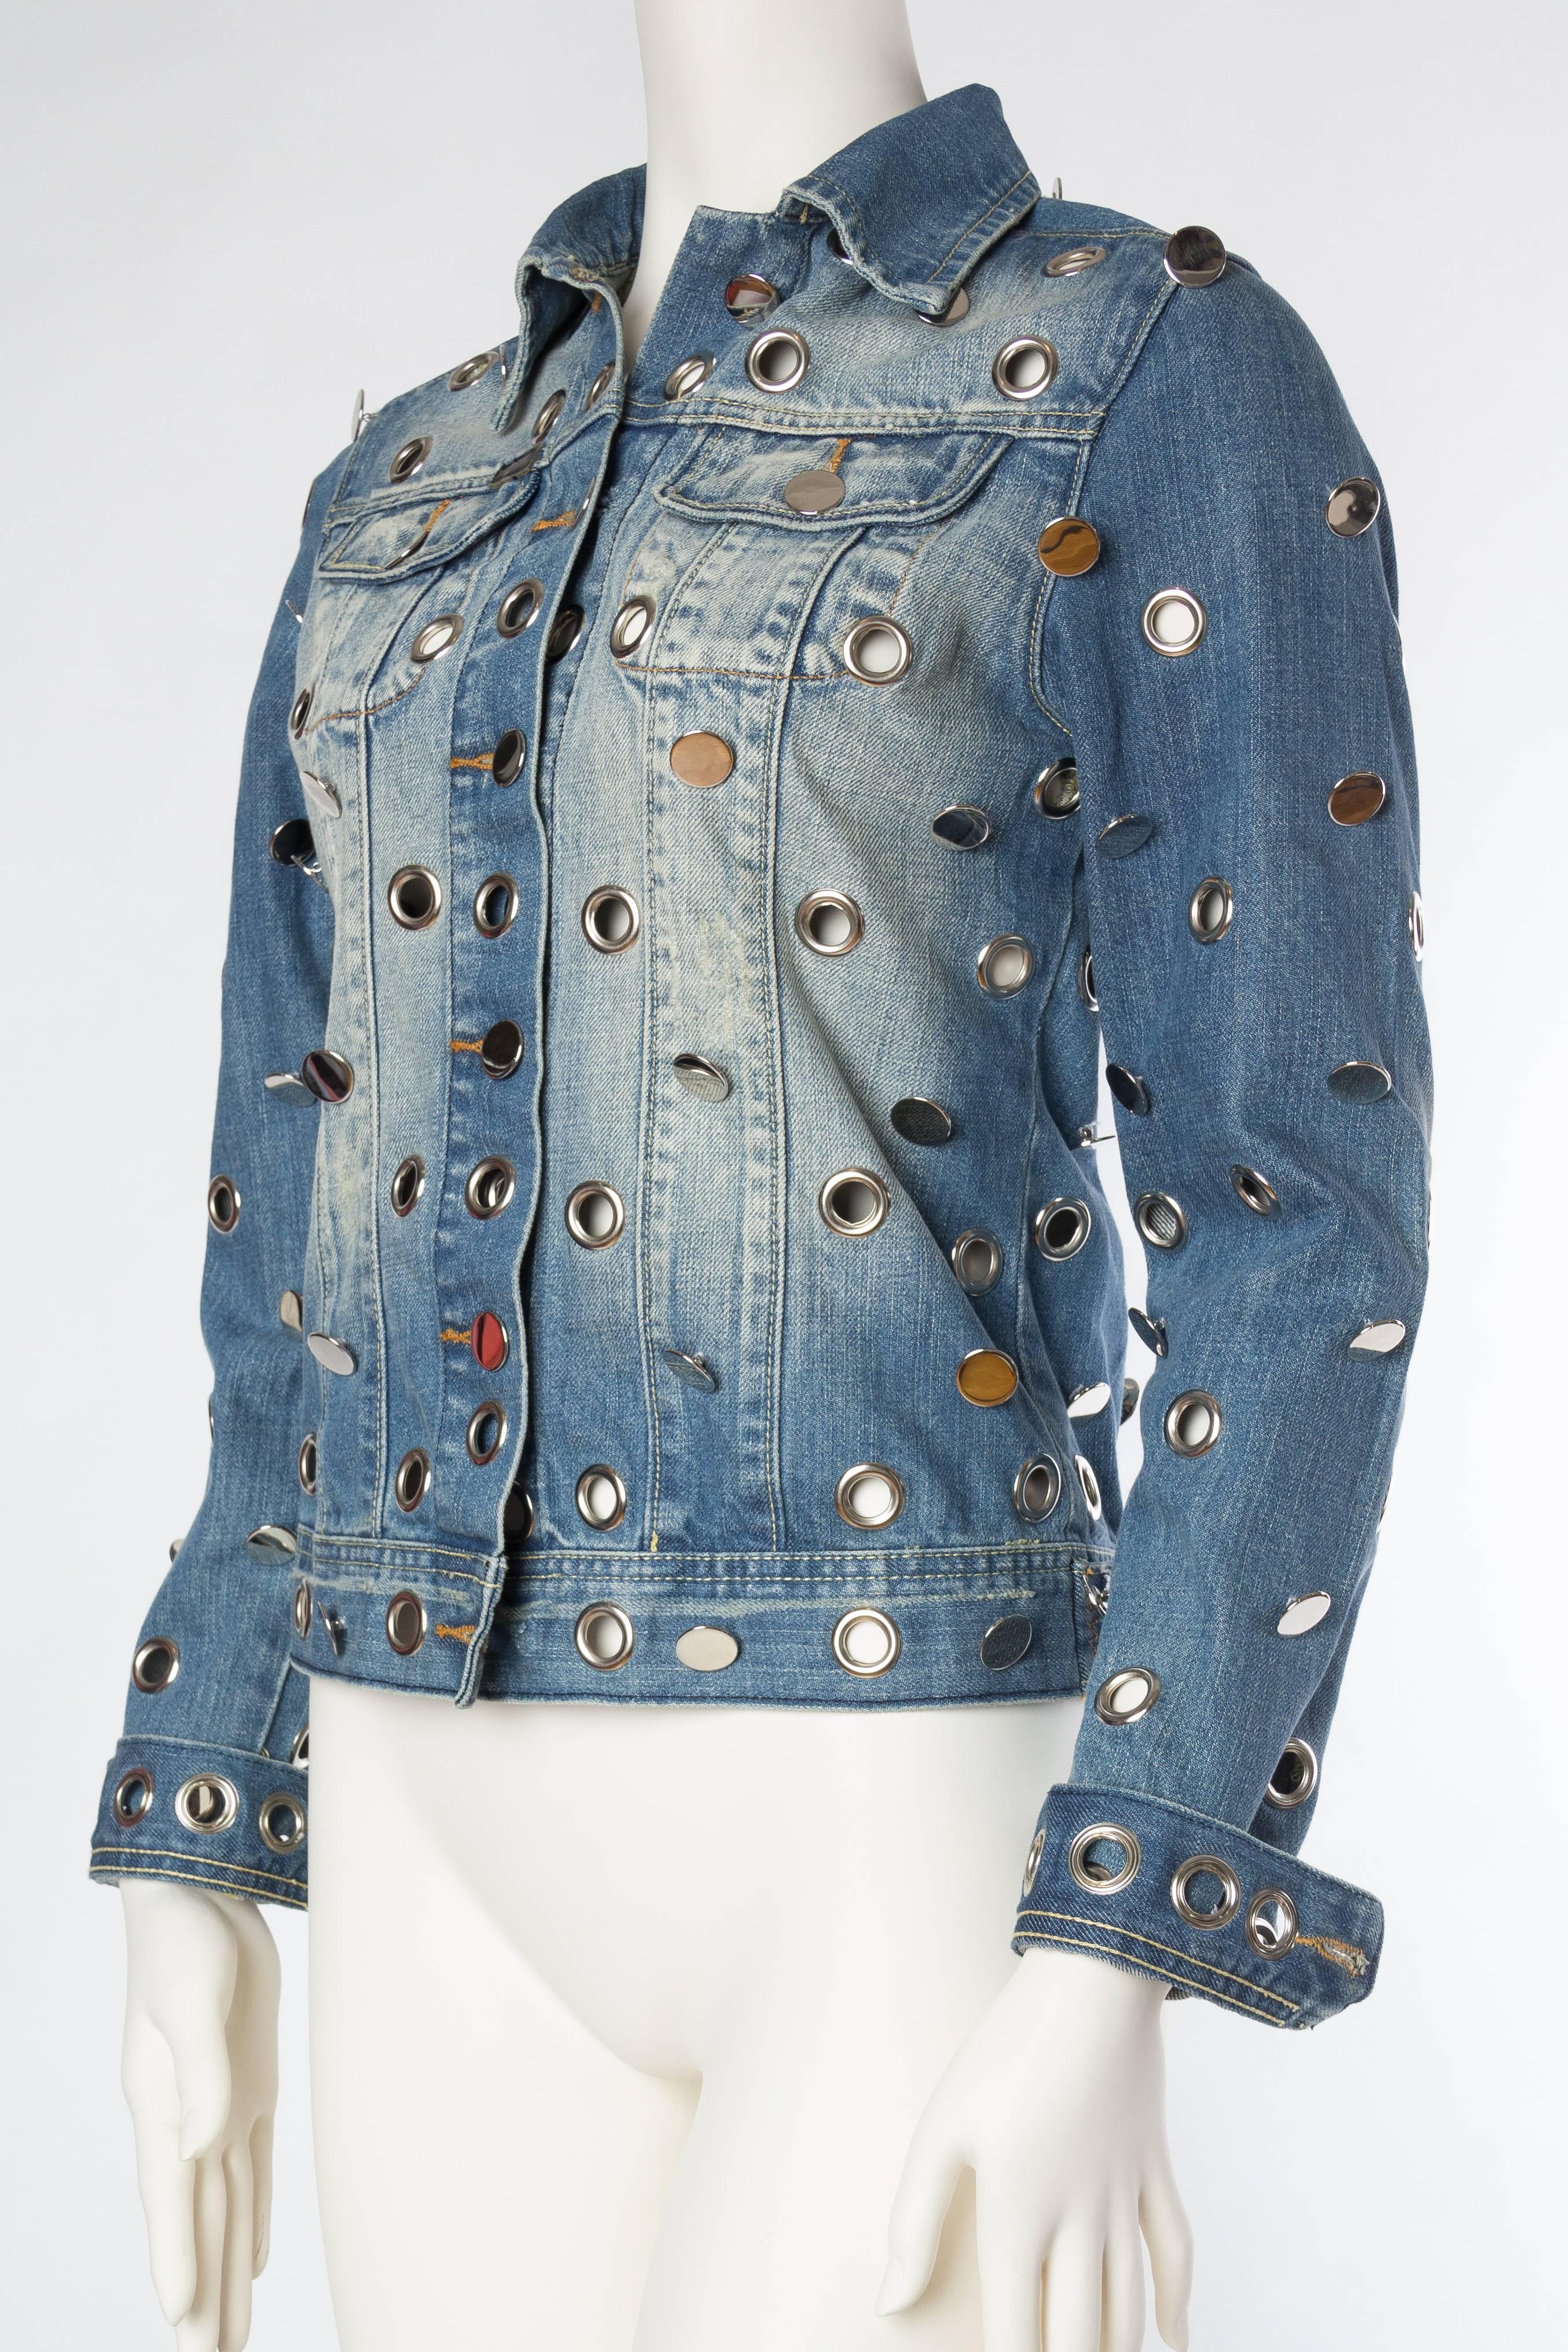 Women's Denim Jacket Covered in Mirrored Buttons and Gromets